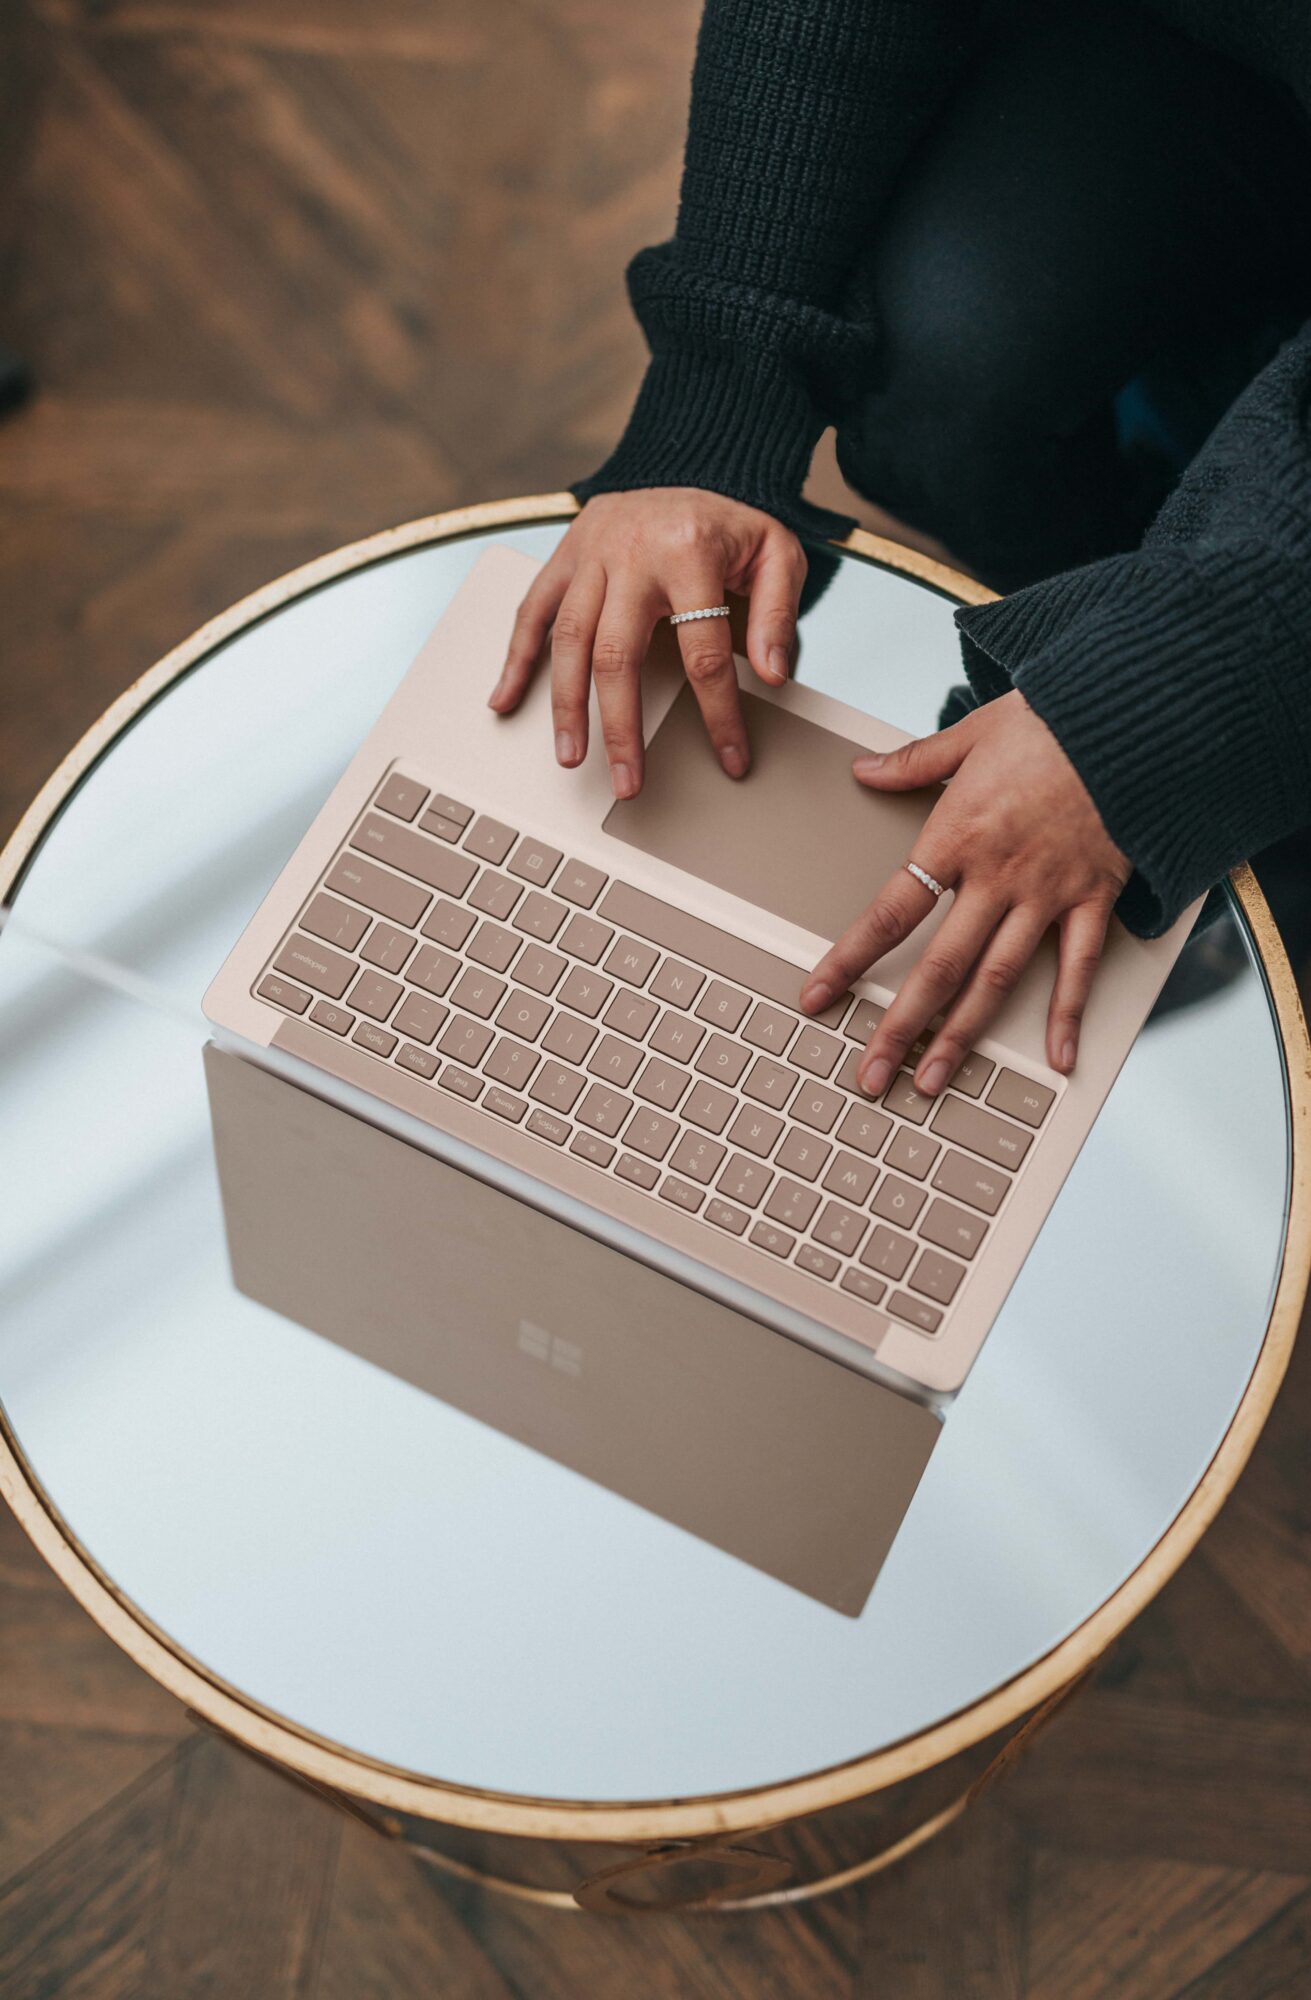 A person’s hands typing on a rose gold laptop on a round white table with a gold rim, with a wooden floor in the background.